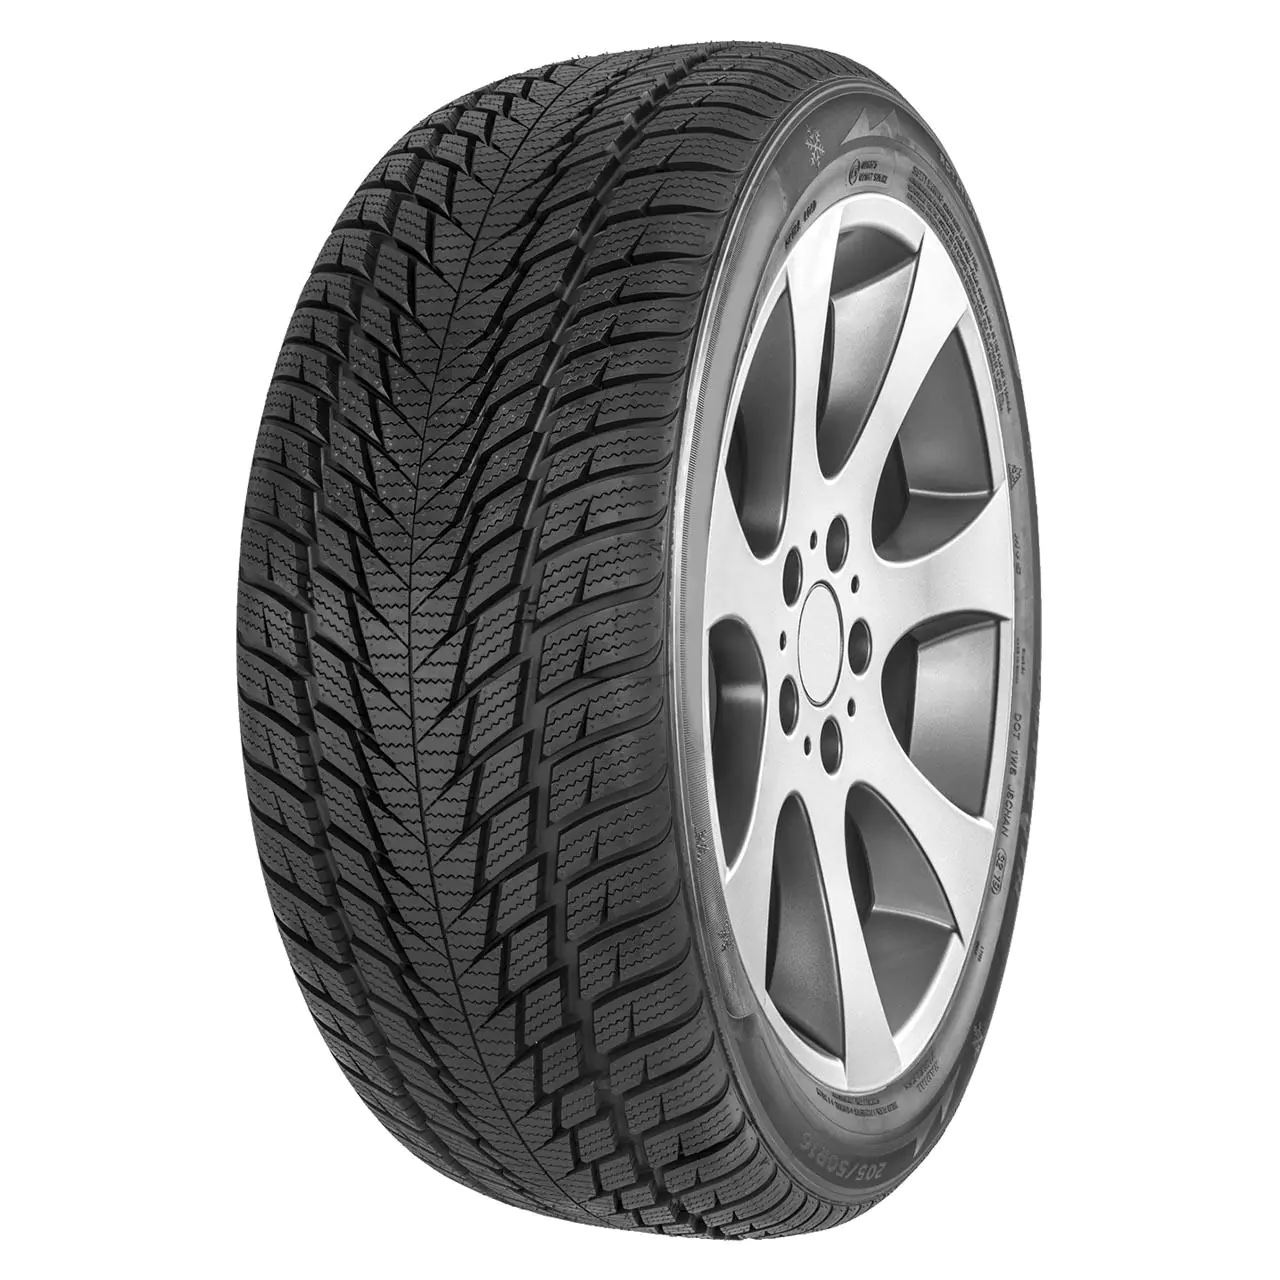 Gomme Autovettura Fortuna 245/45 R19 102V GOWIN UHP2 XL M+S Invernale